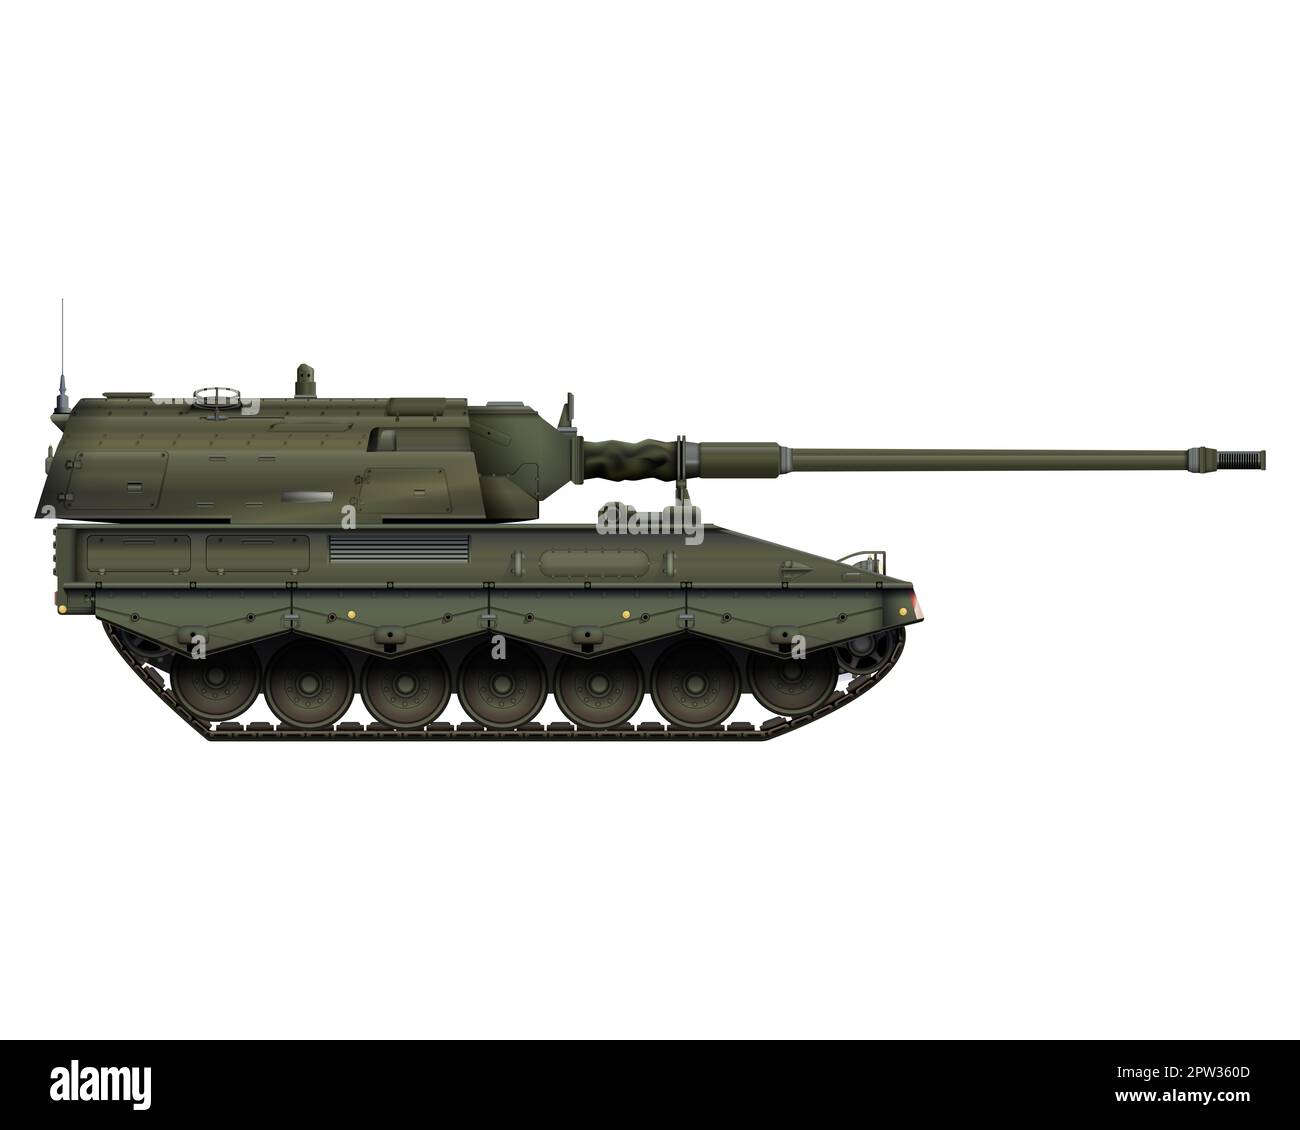 Self-propelled howitzer in realistic style. German 155 mm Panzerhaubitze 2000. Military armored vehicle. Detailed colorful illustration isolated on wh Stock Photo